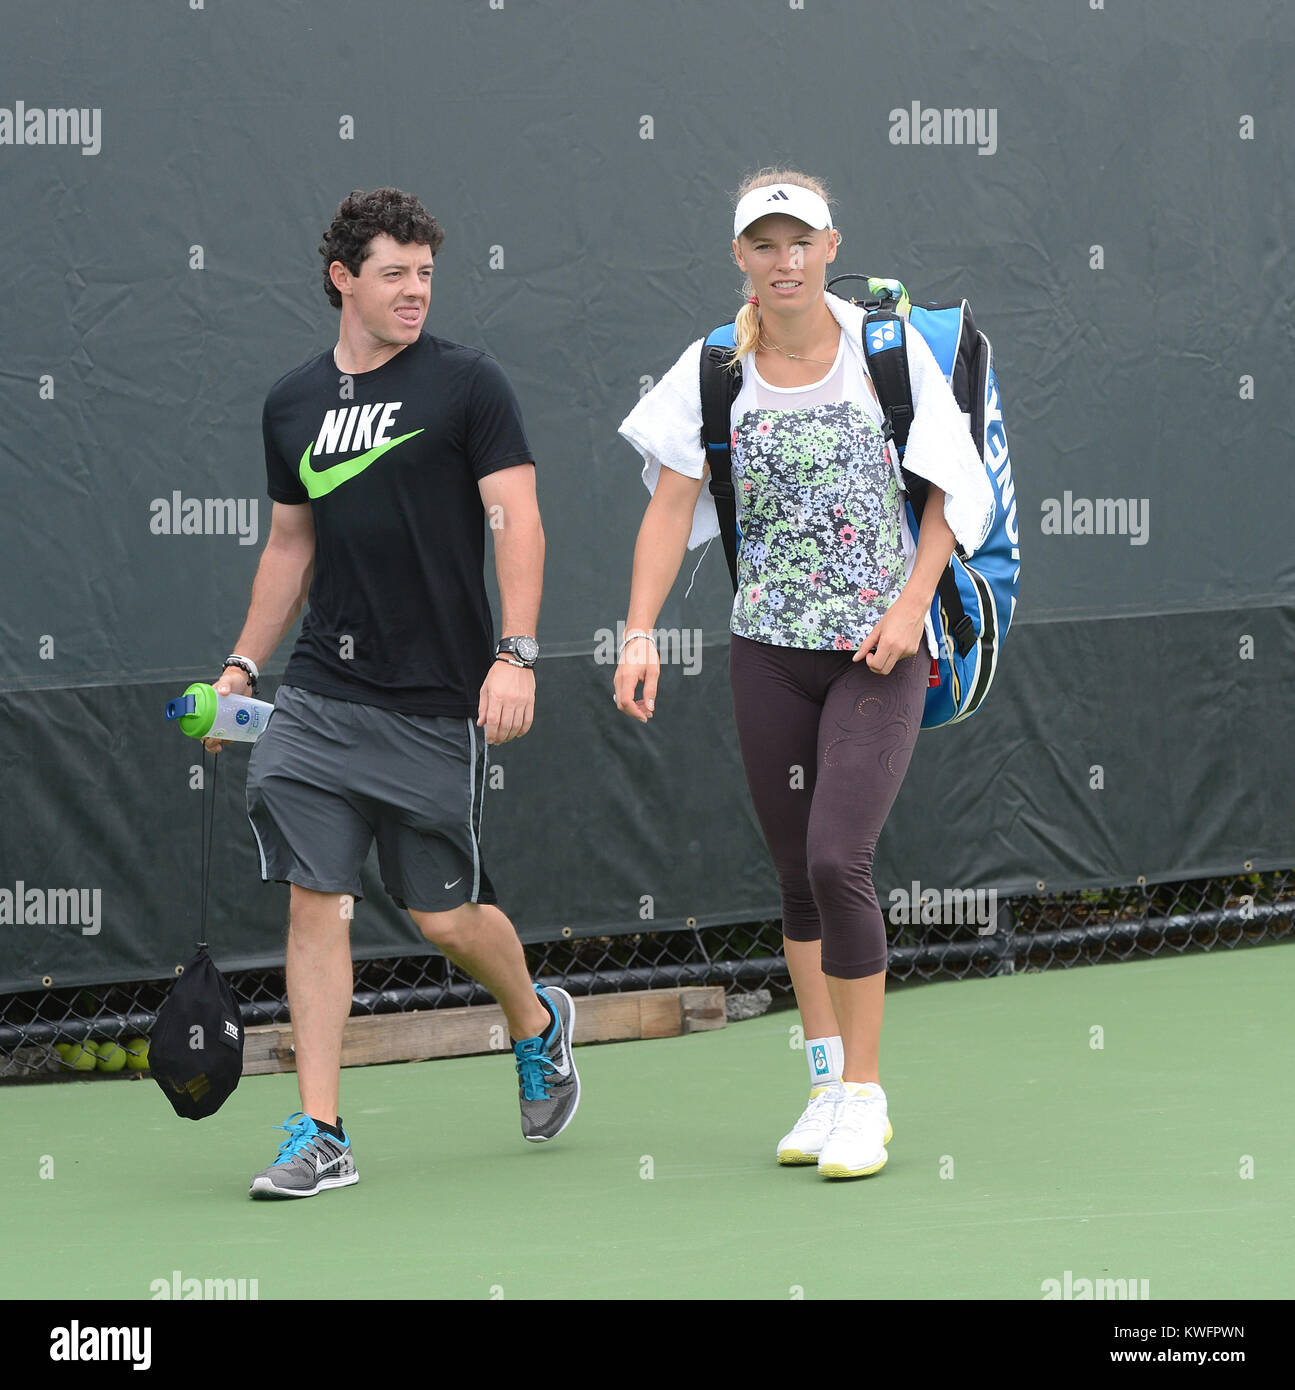 BREAKING NEWS One of sport's most high-profile couples are no more. Golf  star Rory McIlroy announced Wednesday that he had broken off his engagement  to tennis player Caroline Wozniacki. The two-time major